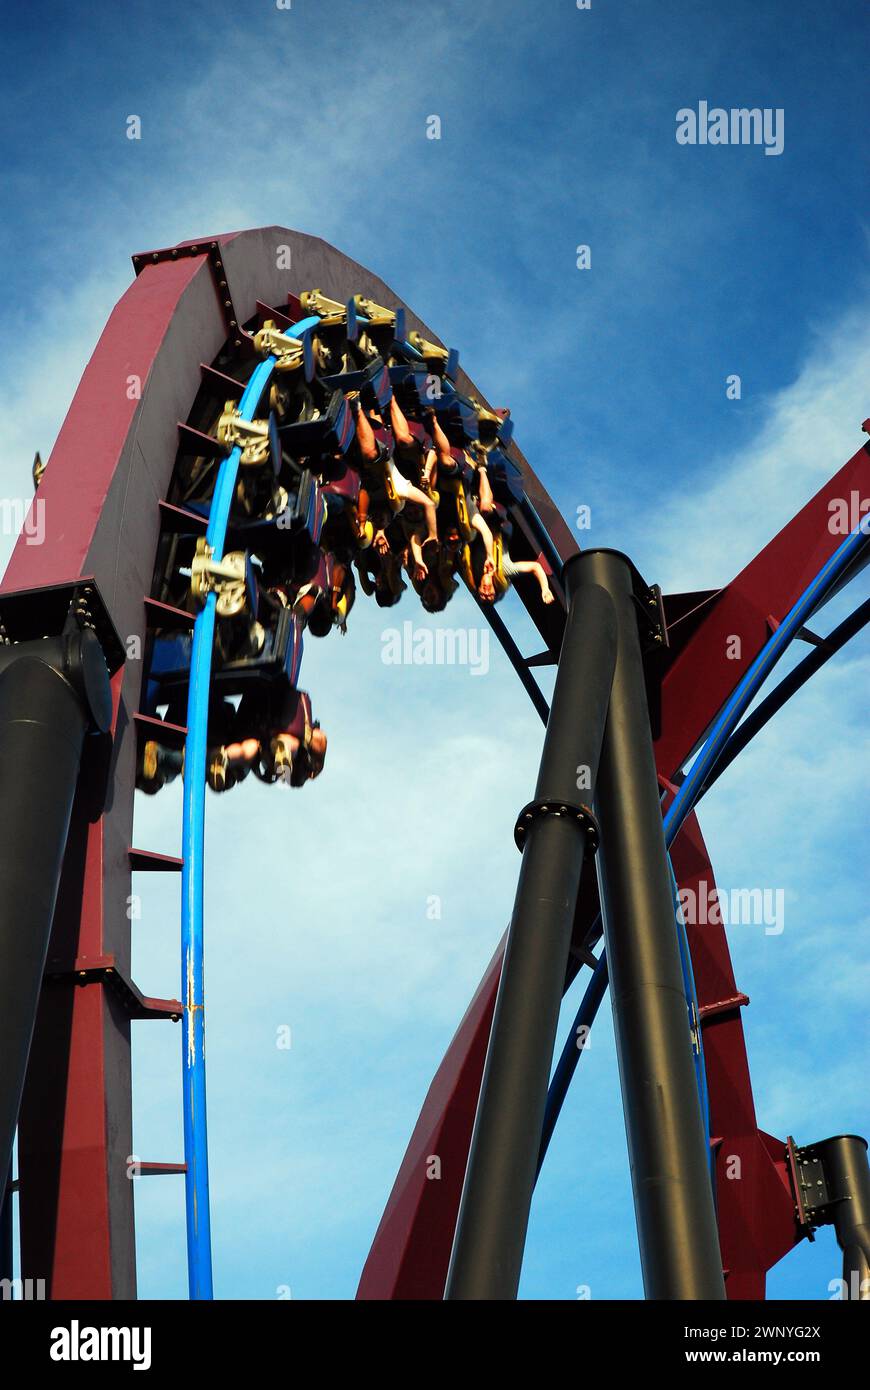 Thrill riders are inverted on an extreme looping roller coaster Stock Photo